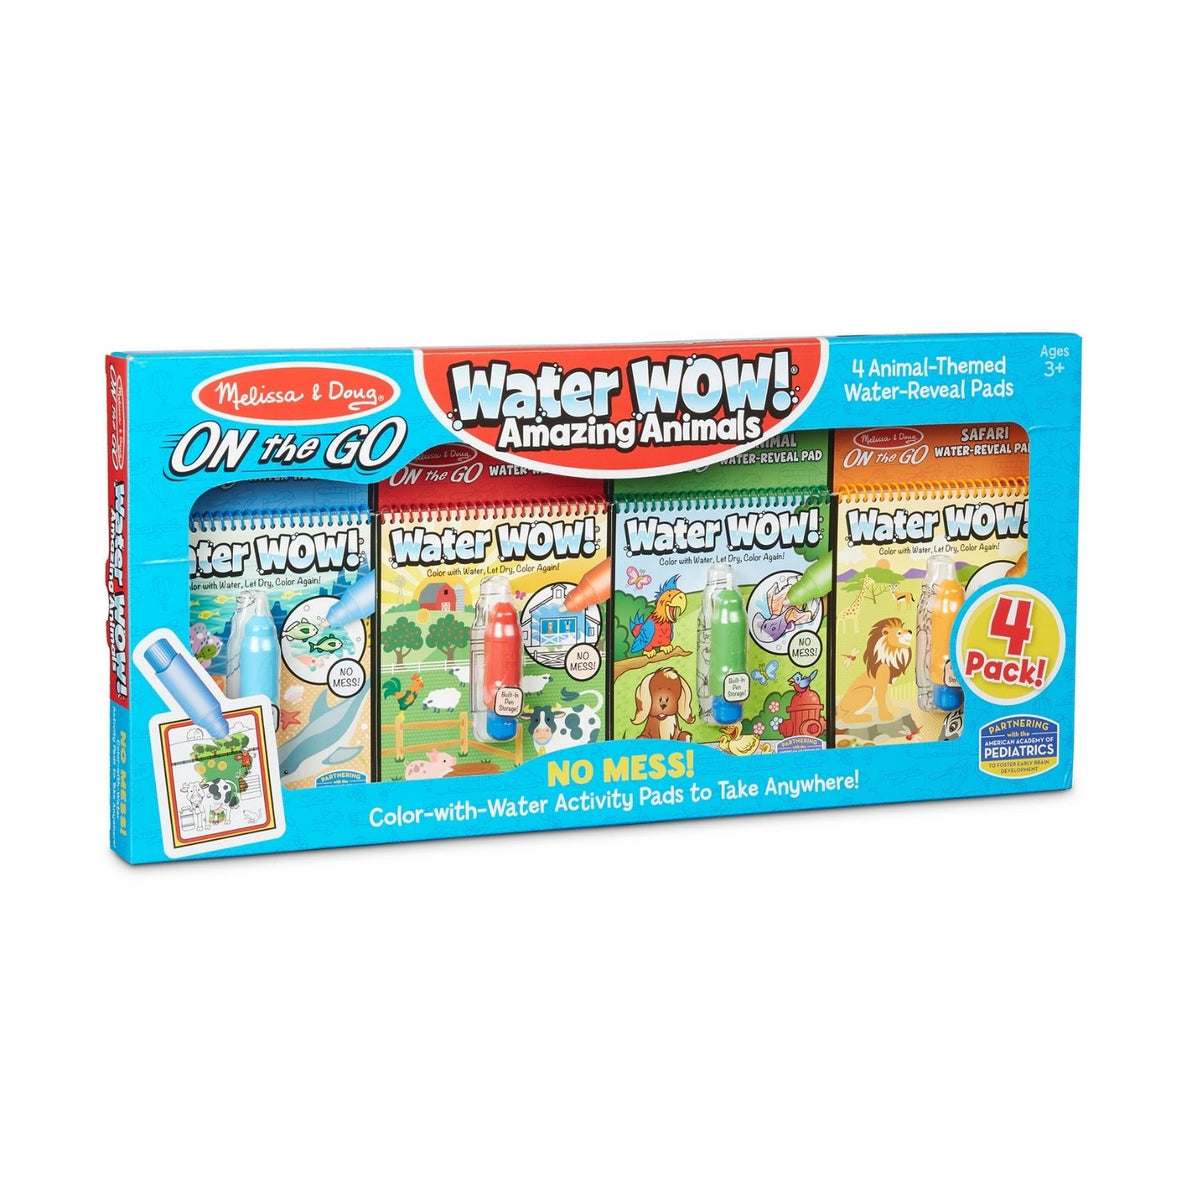 Water Wow! Space Water-Reveal Pad - On the Go Travel Activity- Melissa and  Doug